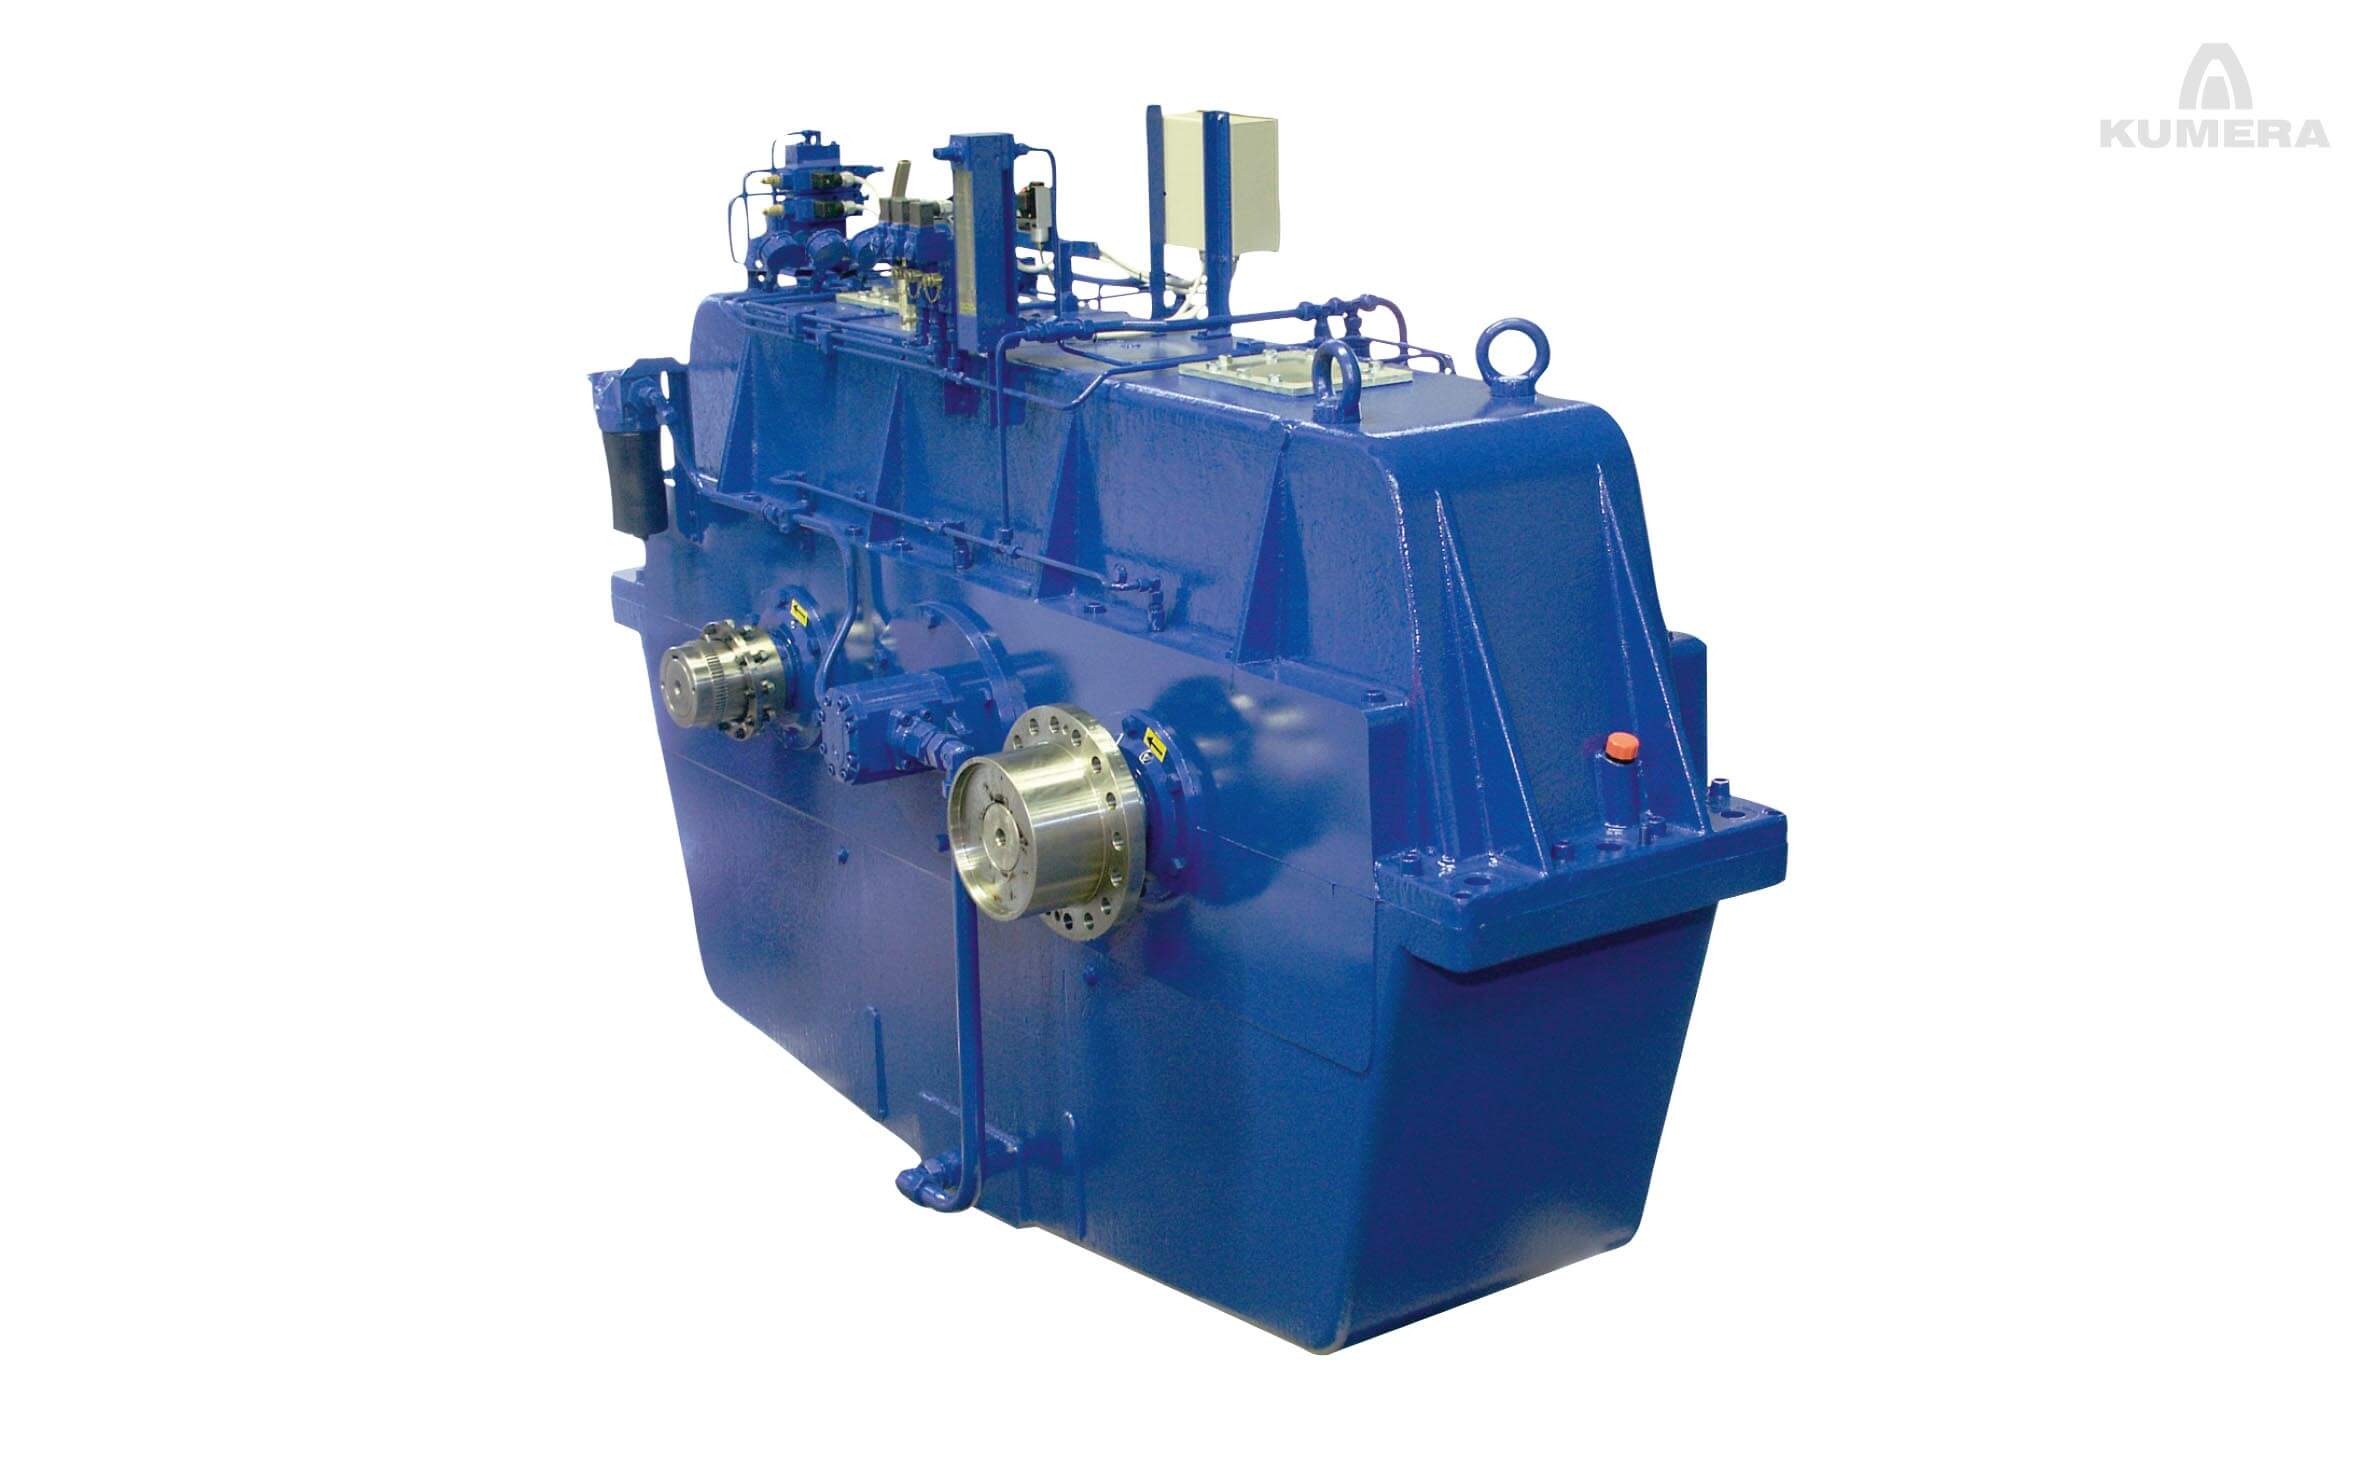 Kumera Custom Built Heavy-Duty Gearboxes for Shipping & Dredging Industry. Kumera Excavator Pumps, Jet Pumps, Winches, Generator Drives, Distribution Drives